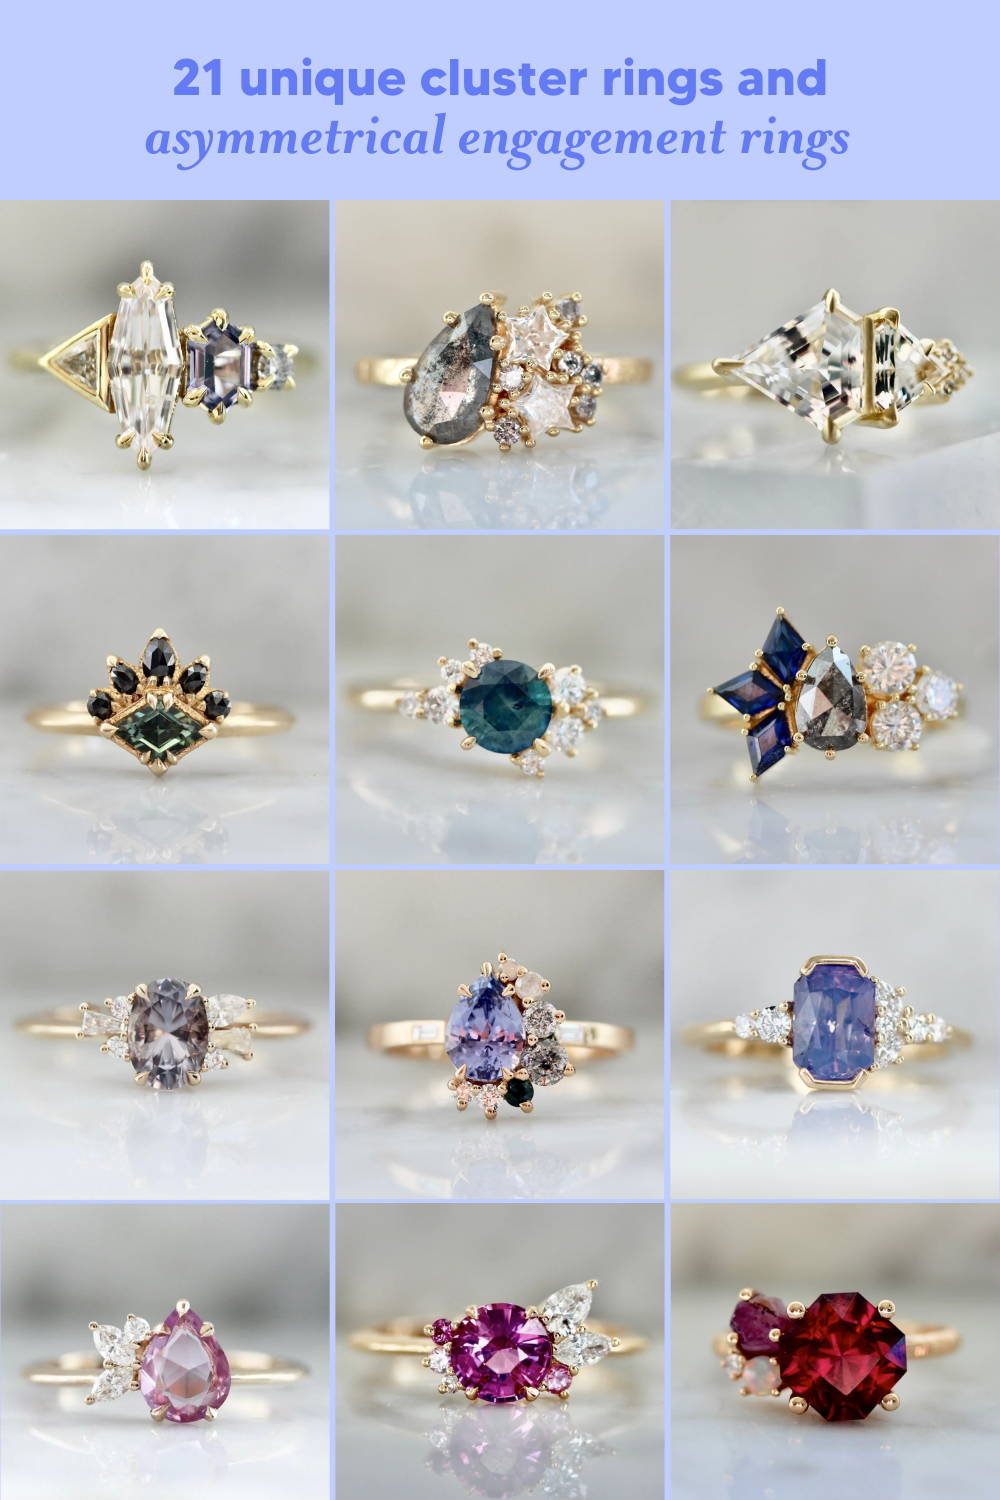 21 unique cluster rings and assymetrical engagement rings